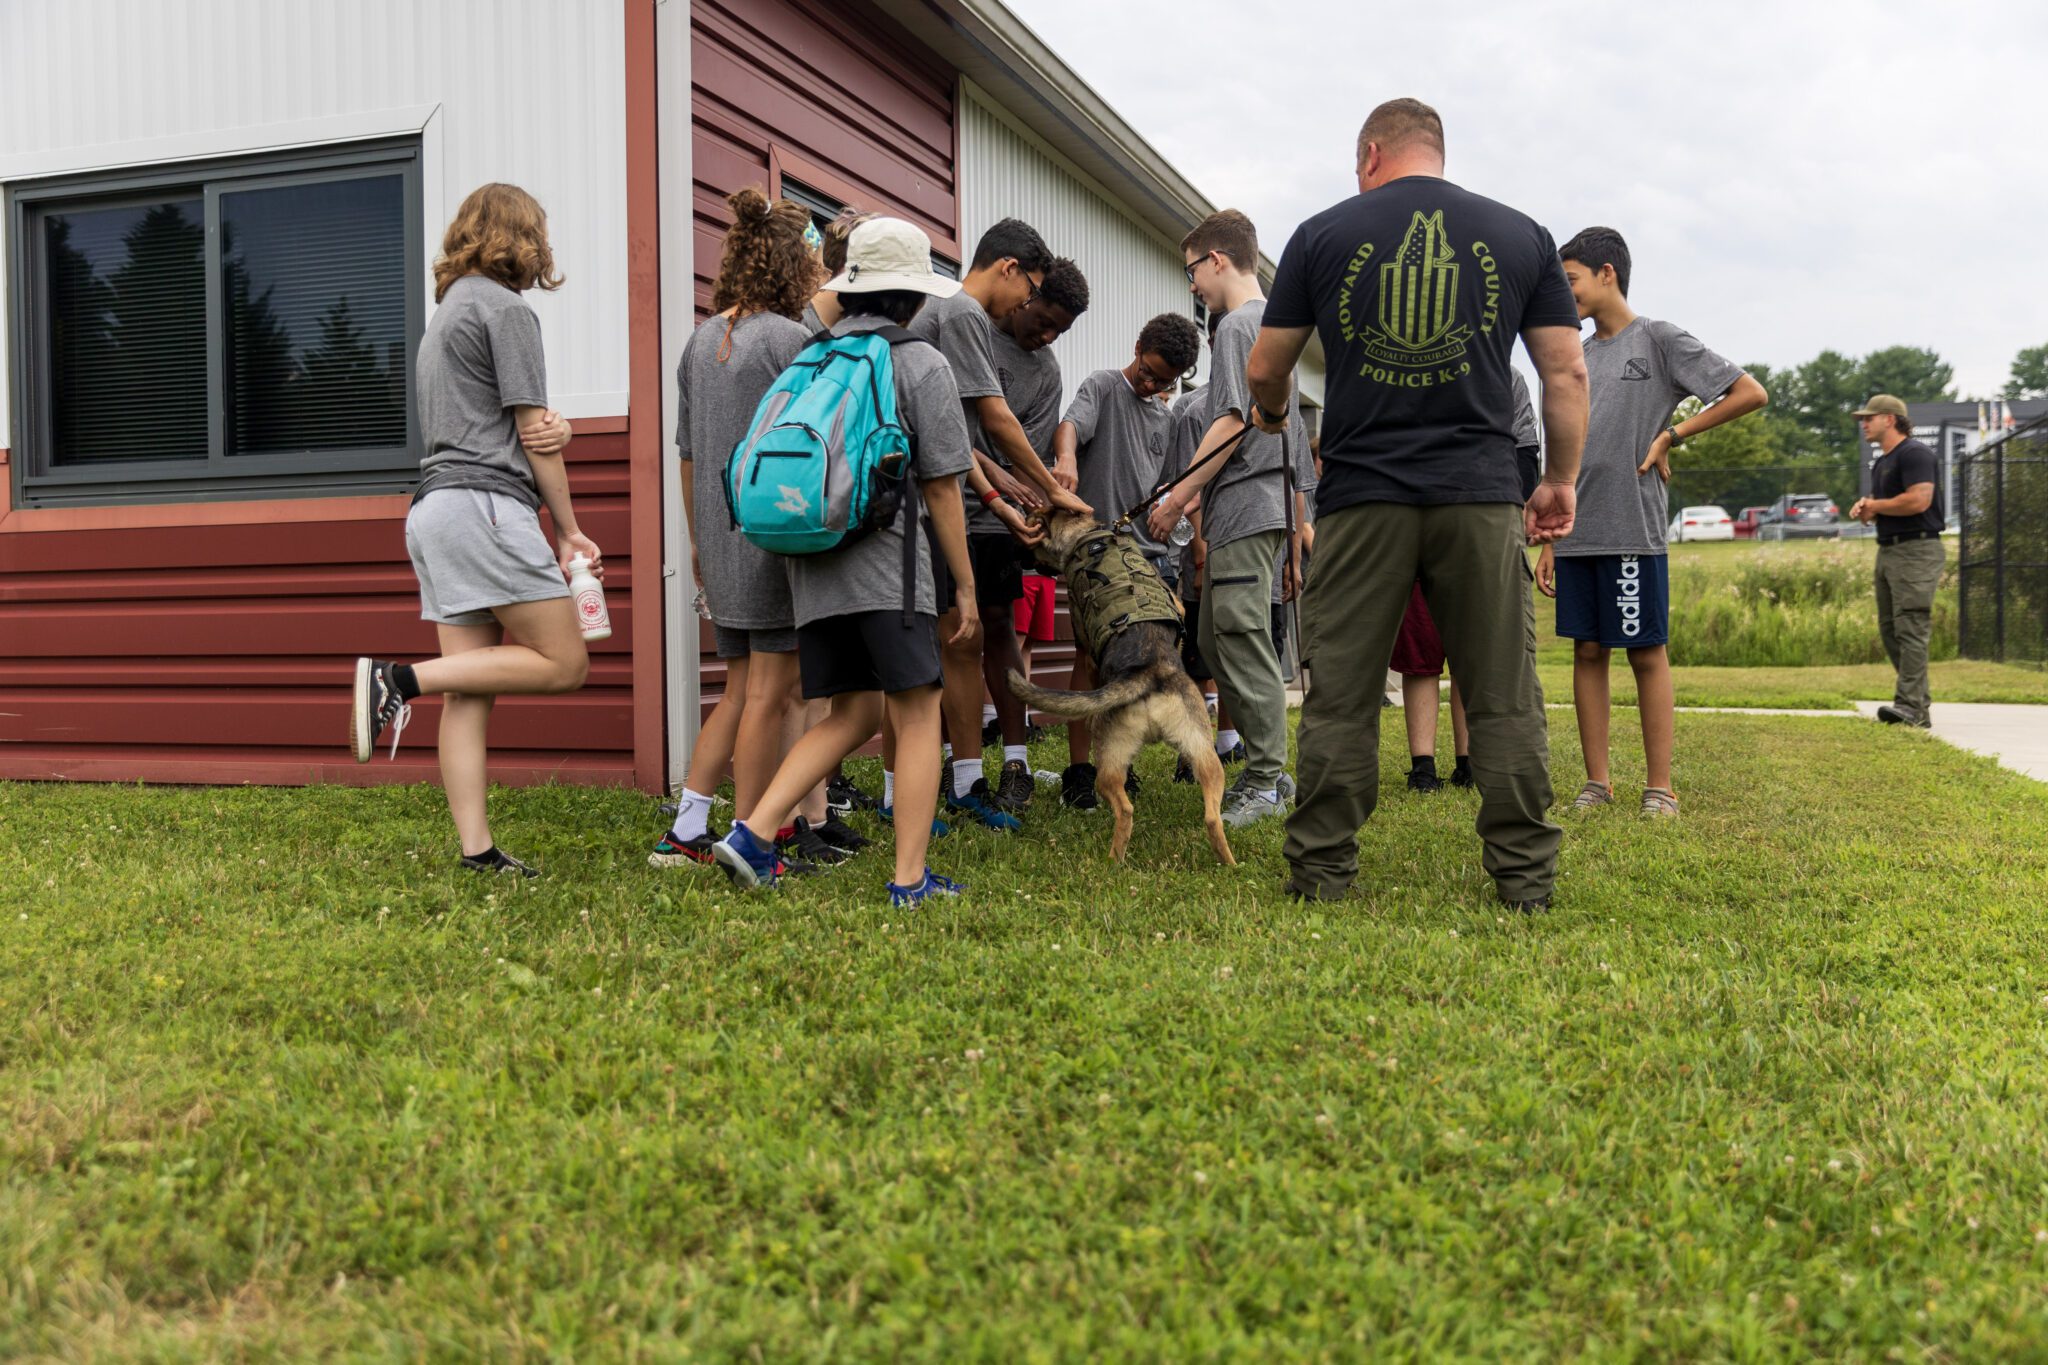 A group of people participating in the P.L.E.D.G.E. Leadership Program standing in front of a building with a dog.